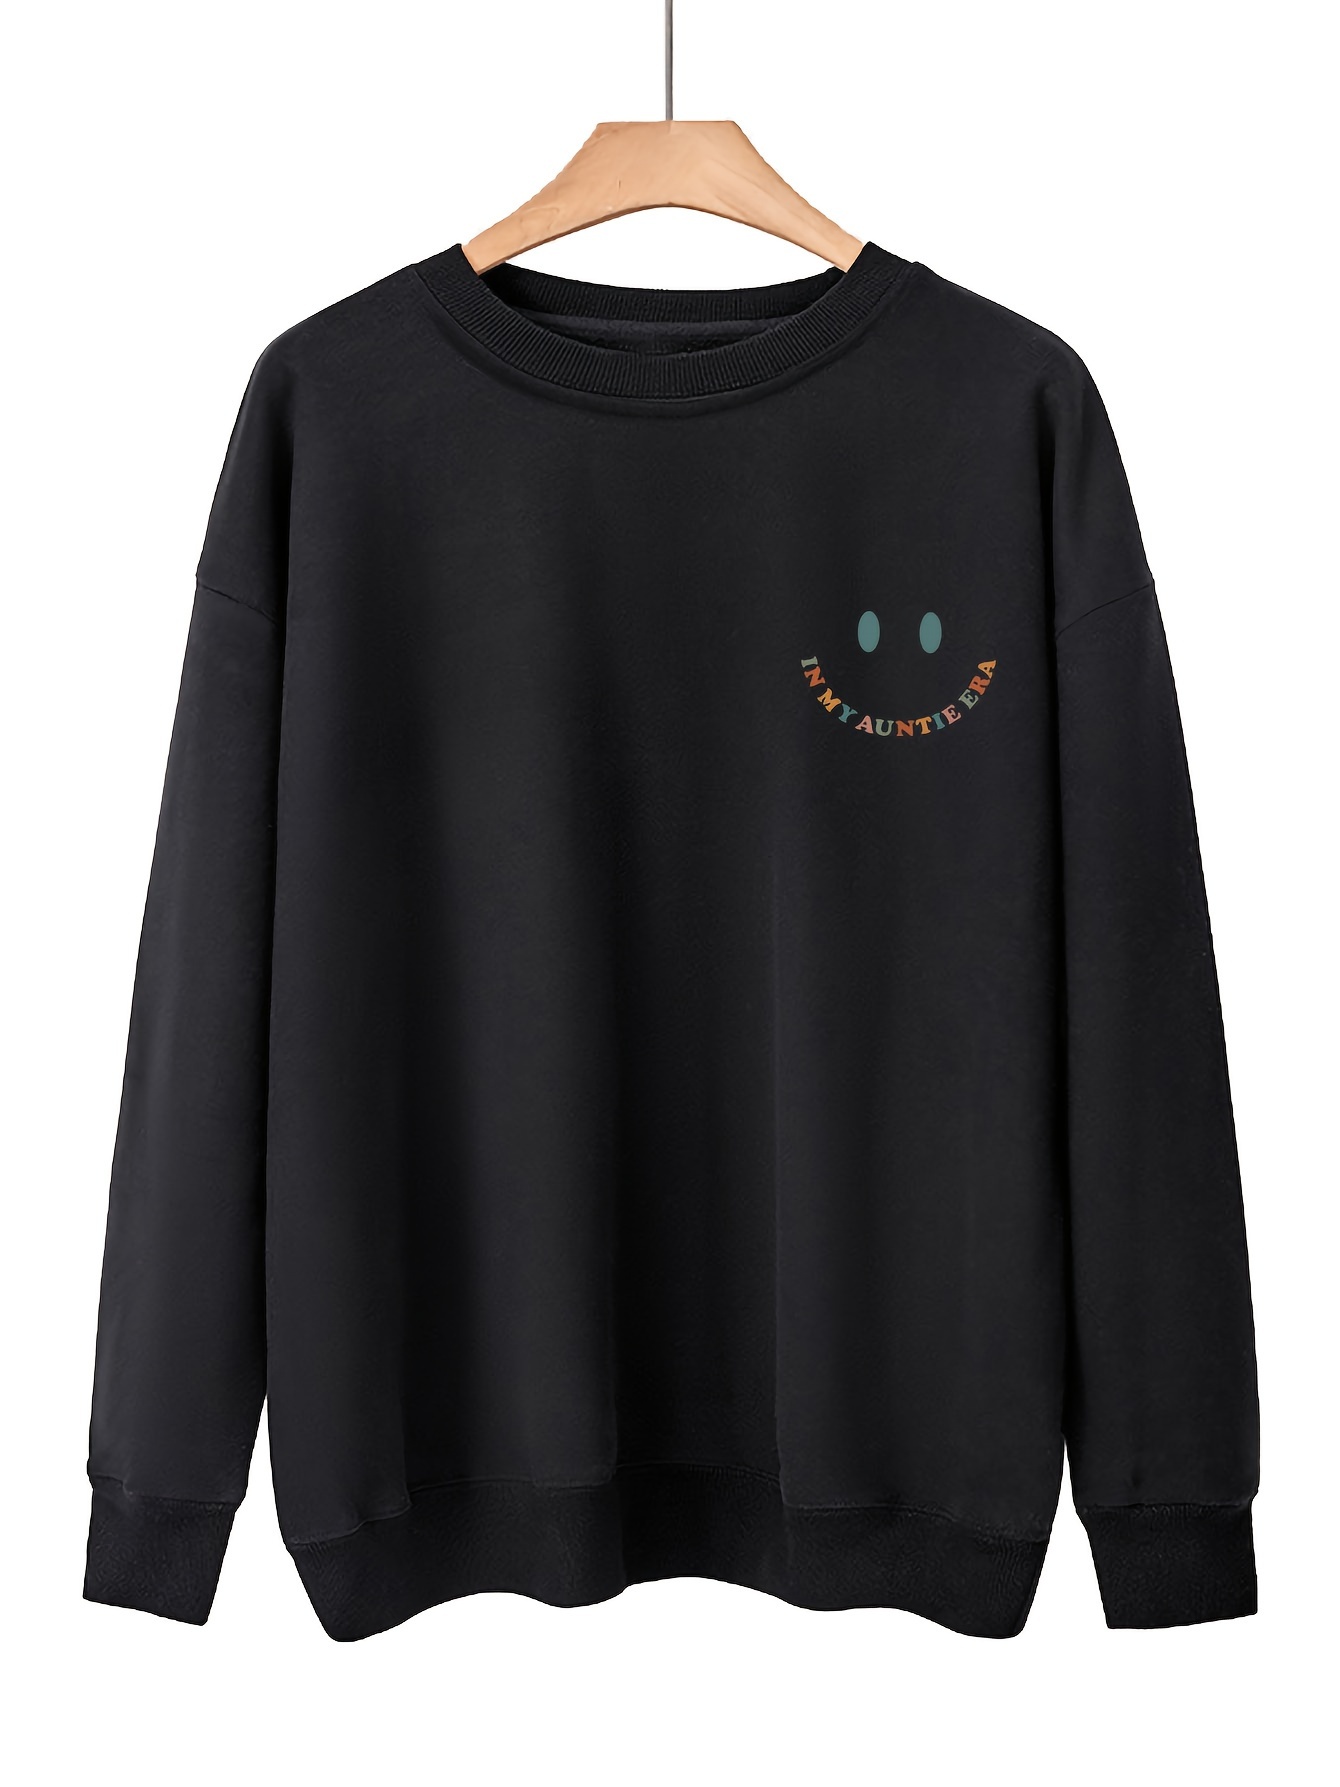 letter print pullover sweatshirt casual long sleeve crew neck sweatshirt for fall winter womens clothing details 6